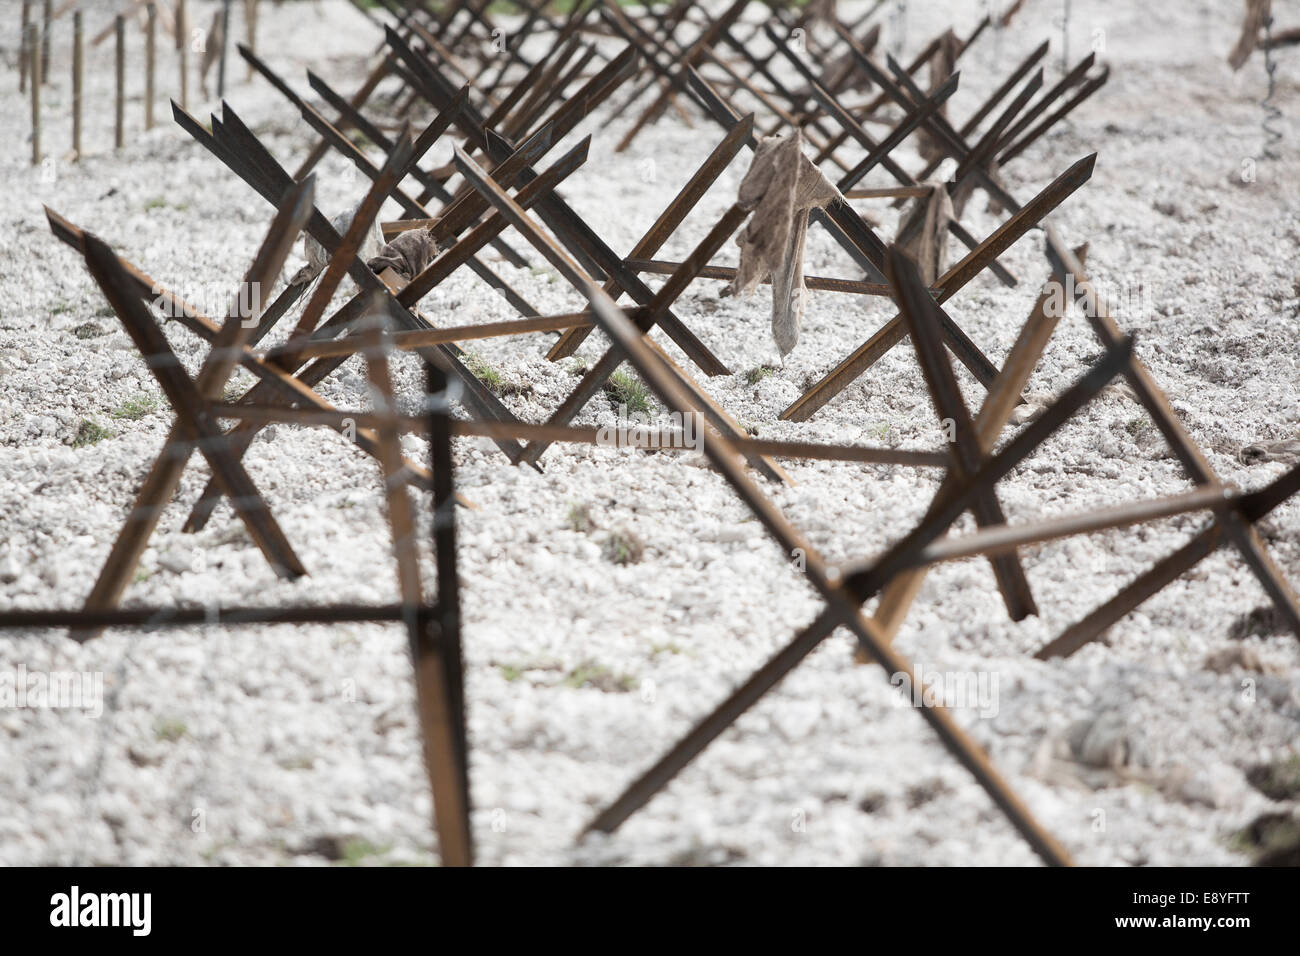 WW1 recreation of no mans land defenses wood and metal posts with barbed wire, a piece of clothing hangs from the barbed wire Stock Photo